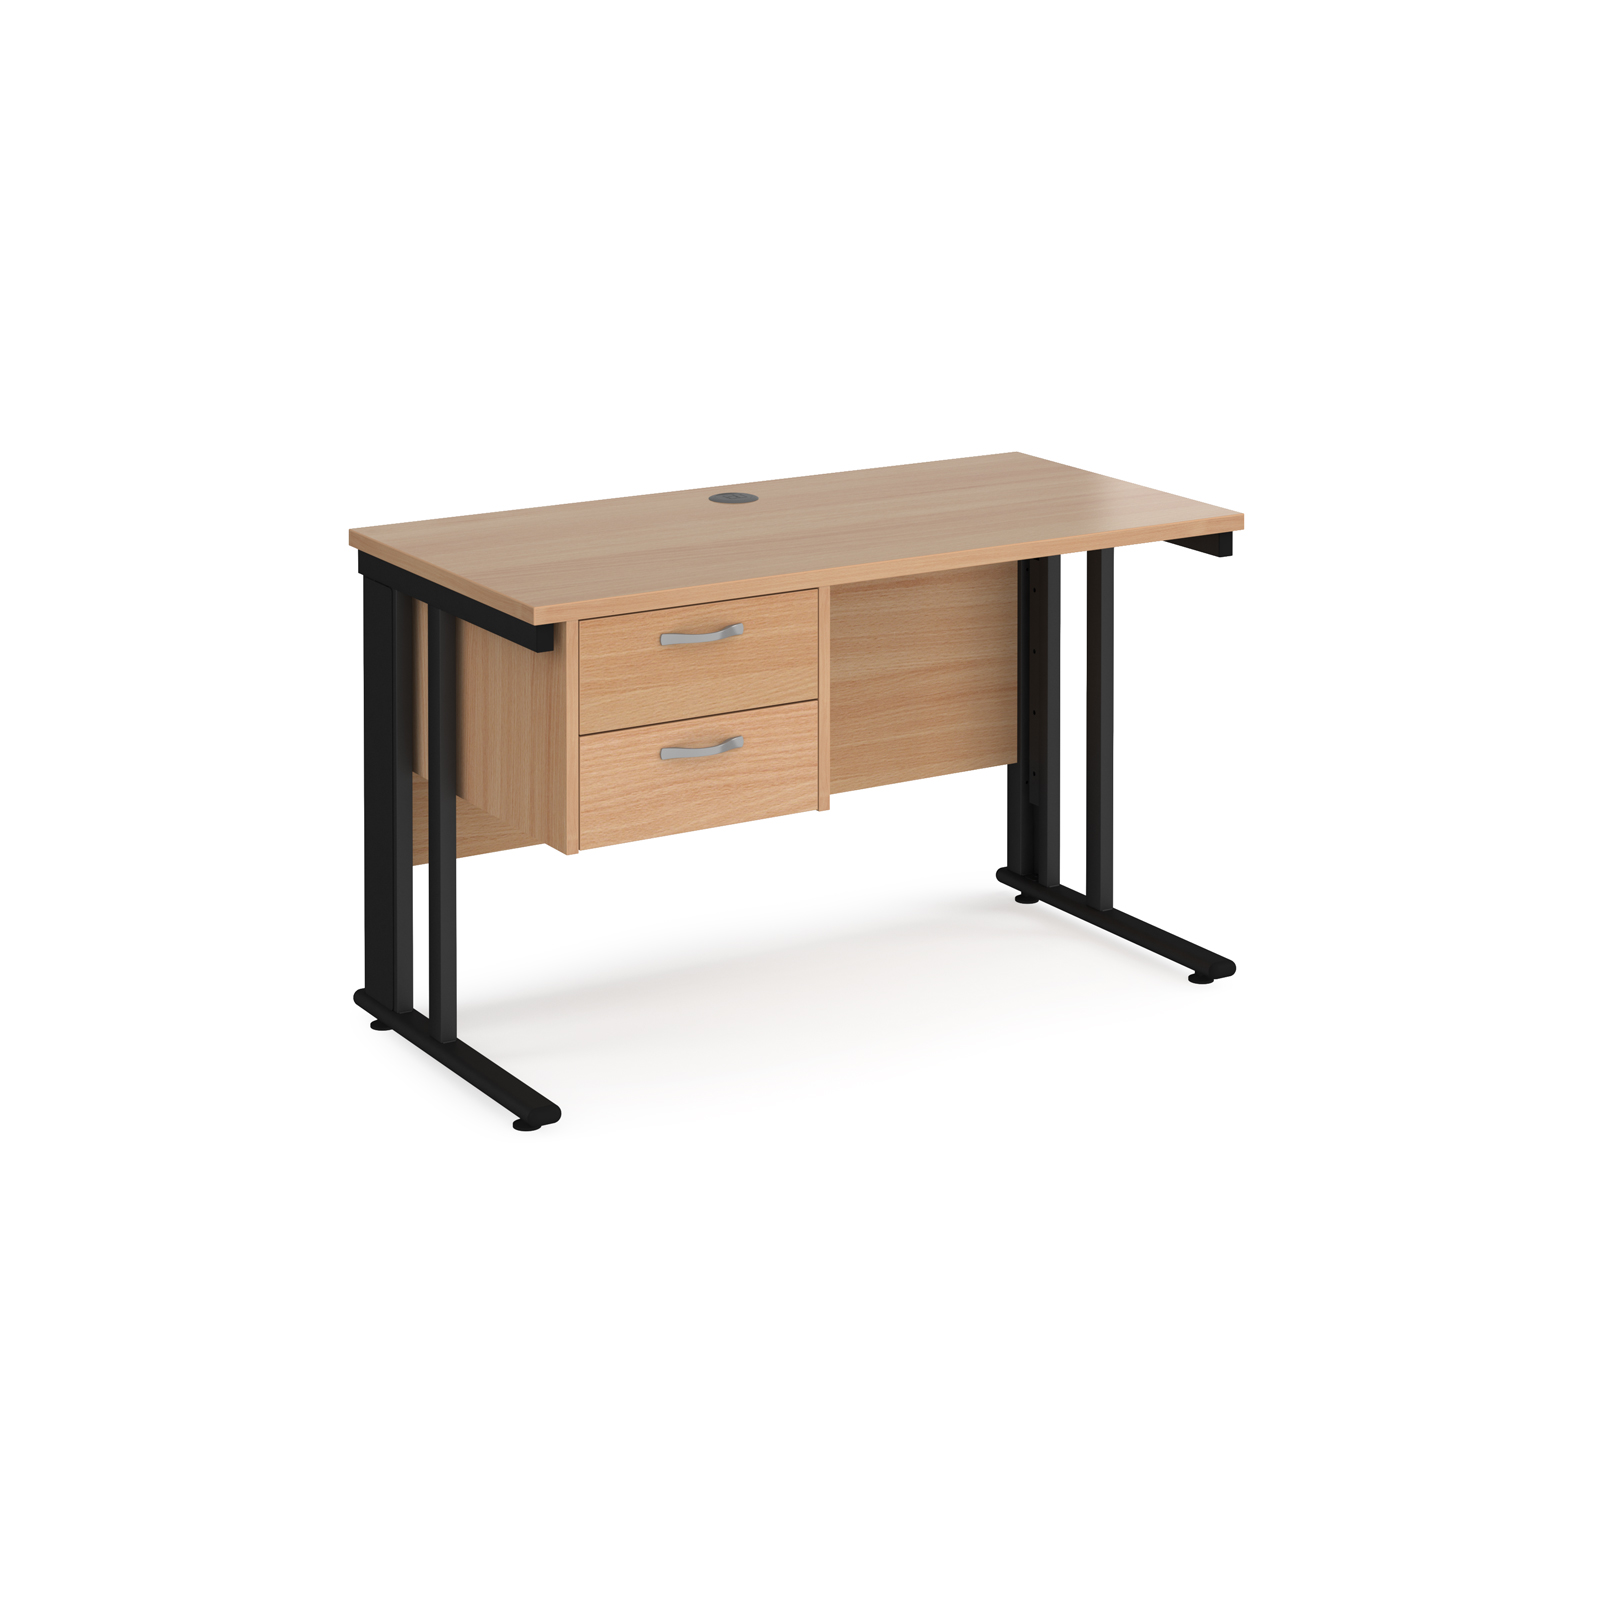 Maestro 25 straight desk 1200mm x 600mm with 2 drawer pedestal - black cable managed leg frame, beech top